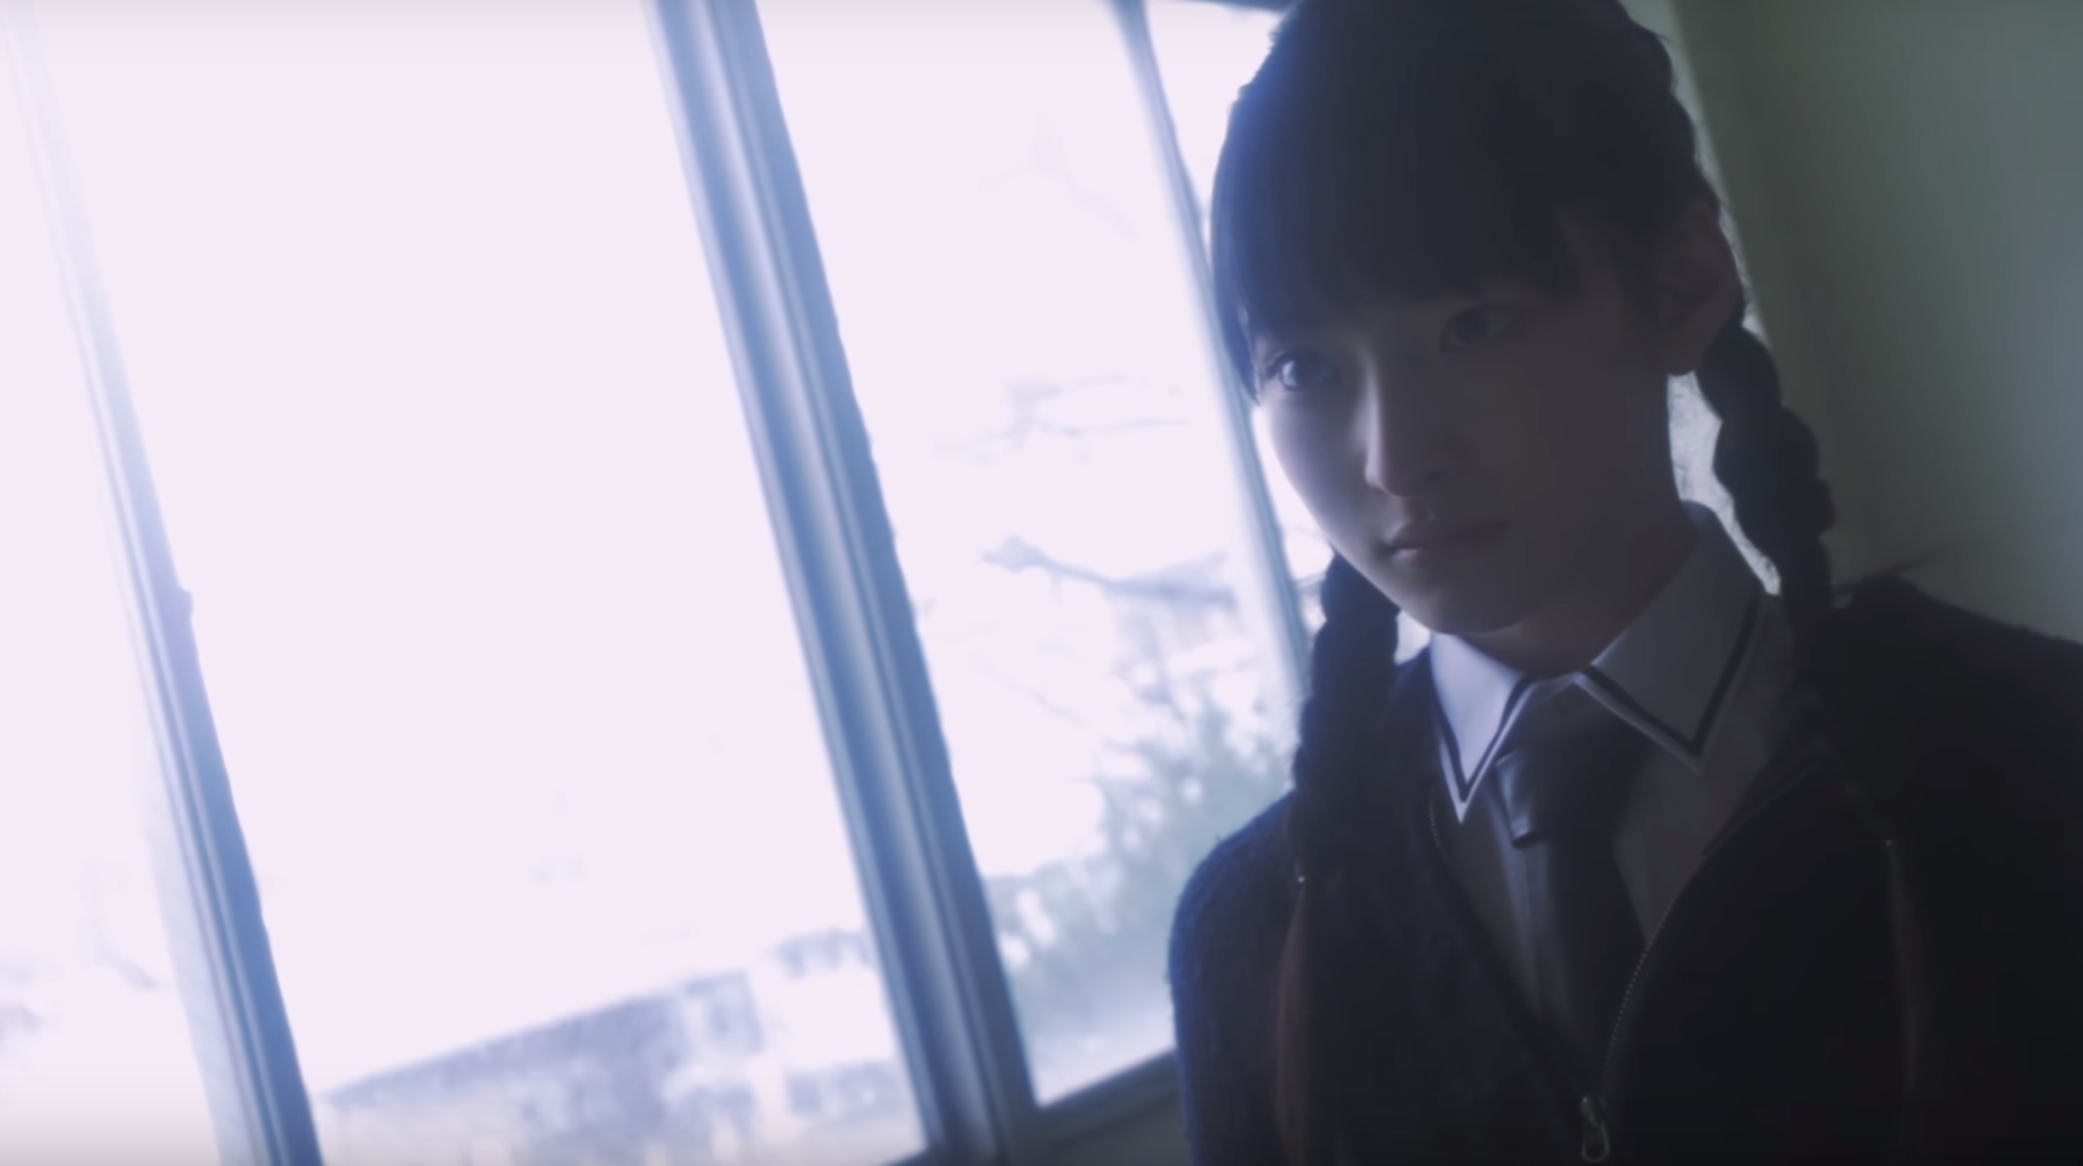 One-Day Limited Release: “Nannara Kimi to Tooku Made” Starring Mtasuno Rina and Others